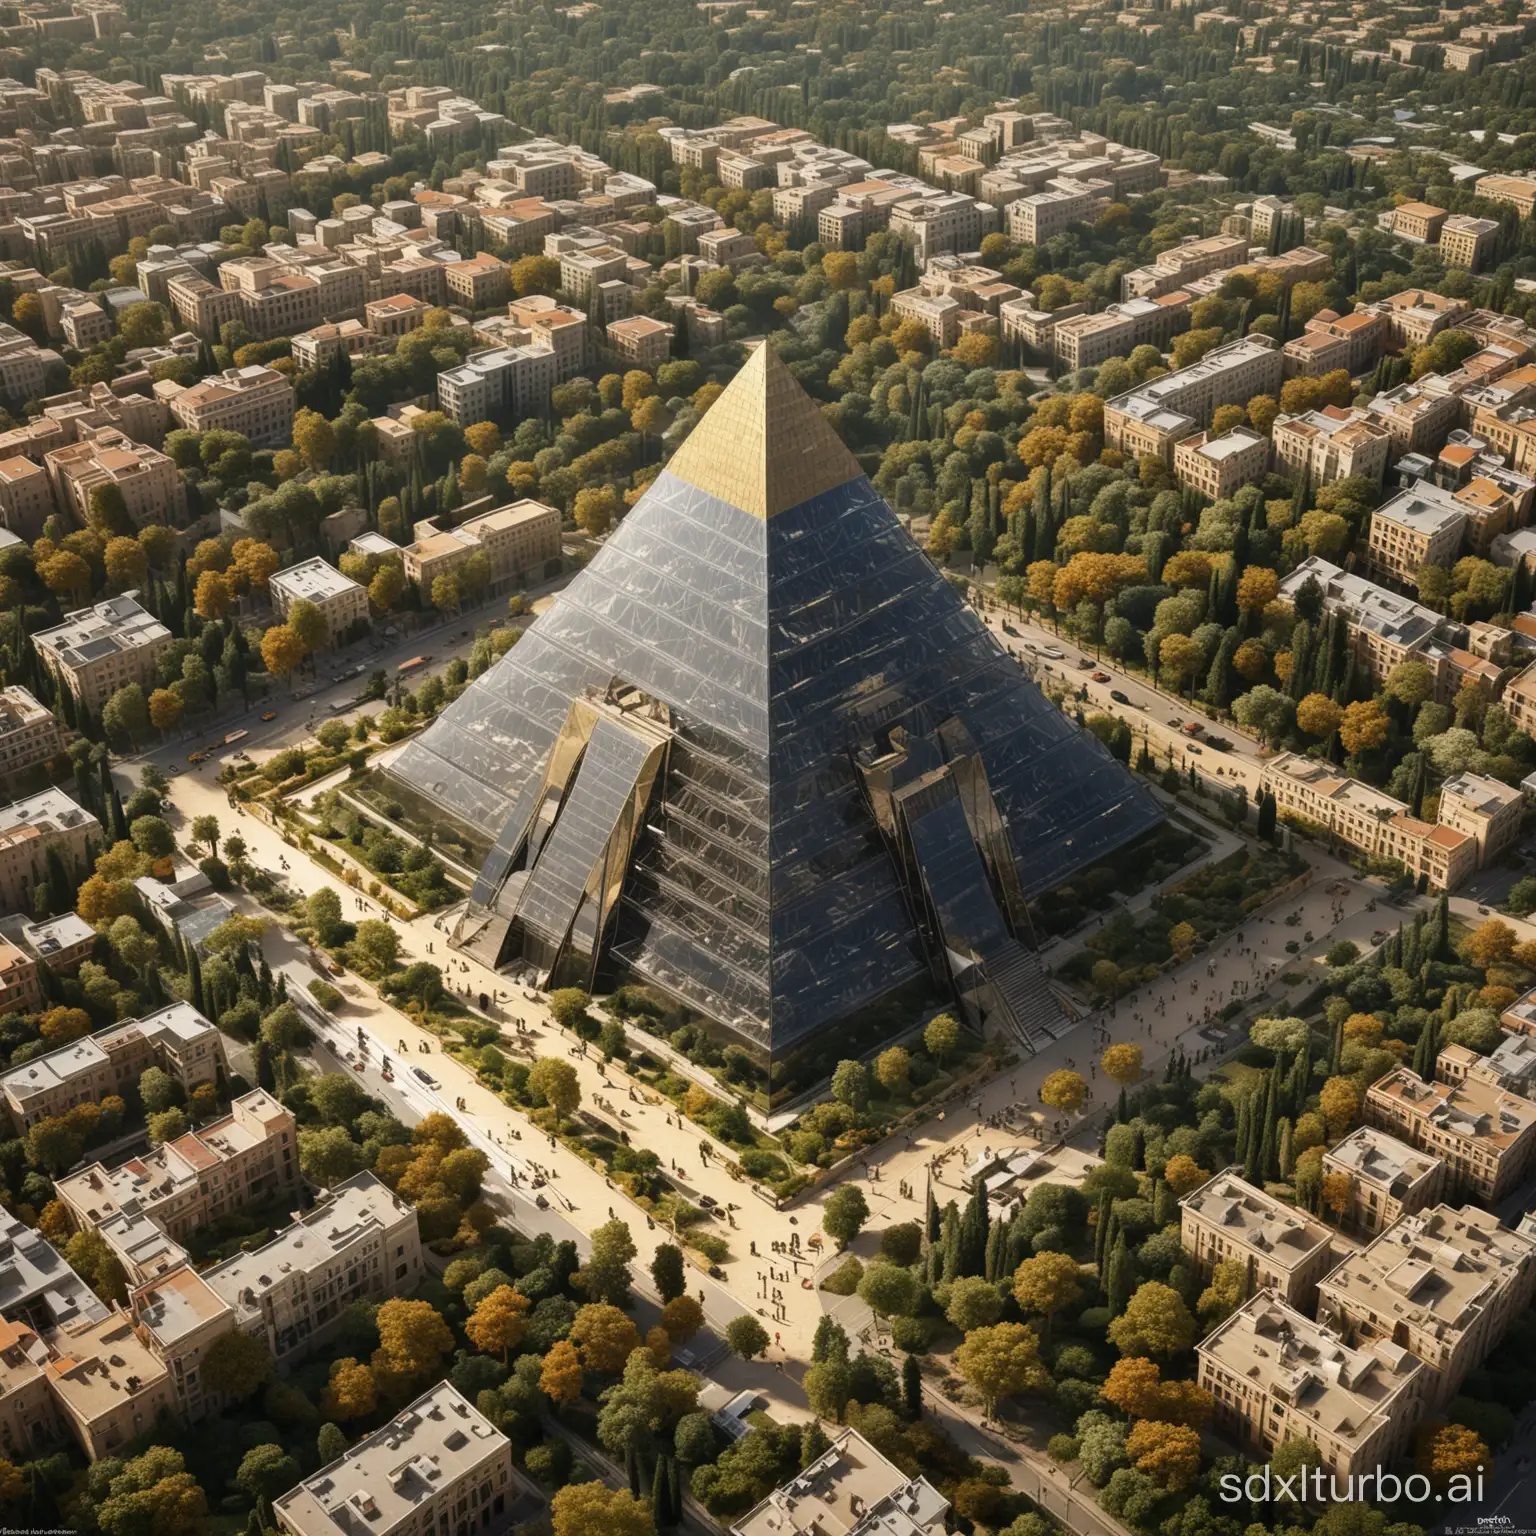 Giant, pyramidal and futuristic architecture, with pyramid-cathedral-castle futuristic and colossae, t pyramidal, aesthetic, colored, of two hundred floors and fifteen hundred meters high, in the shape of a cathedral, in glass and plastic, golden and black, with gardens and vegetation, hyper photorealistic ! ! Very photorealistic !